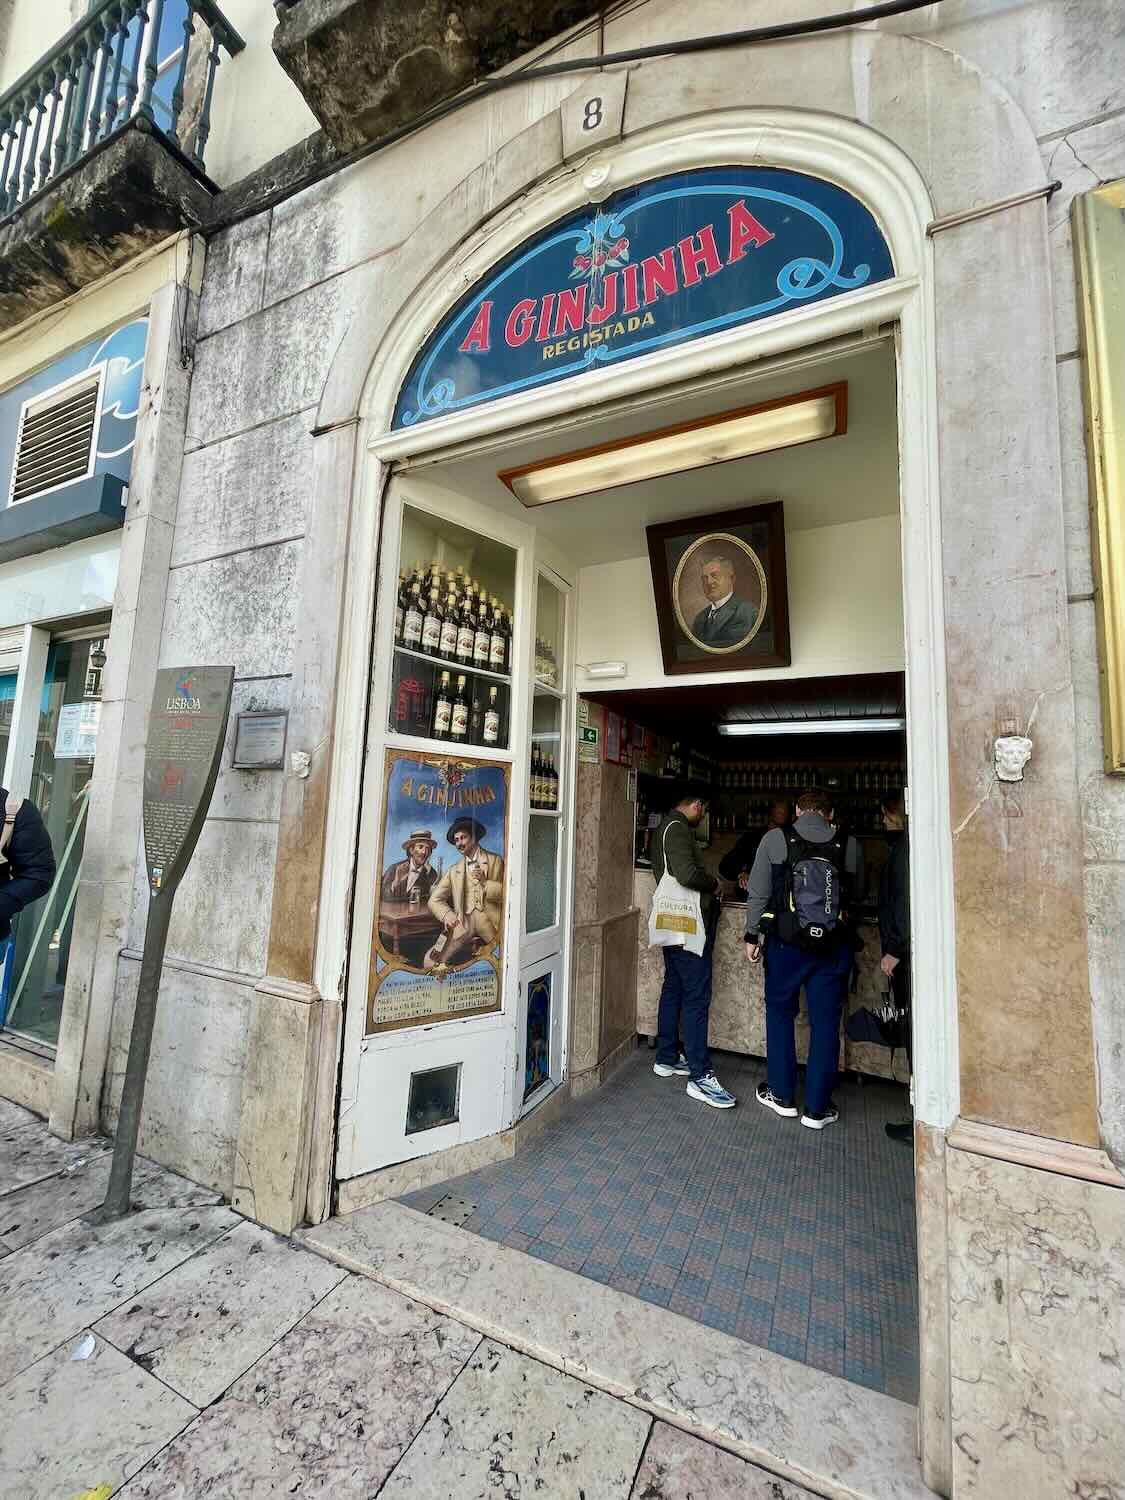 Patrons at the entrance of 'A Ginjinha', a traditional Lisbon establishment famous for its sour cherry liqueur, highlighting a unique local experience.